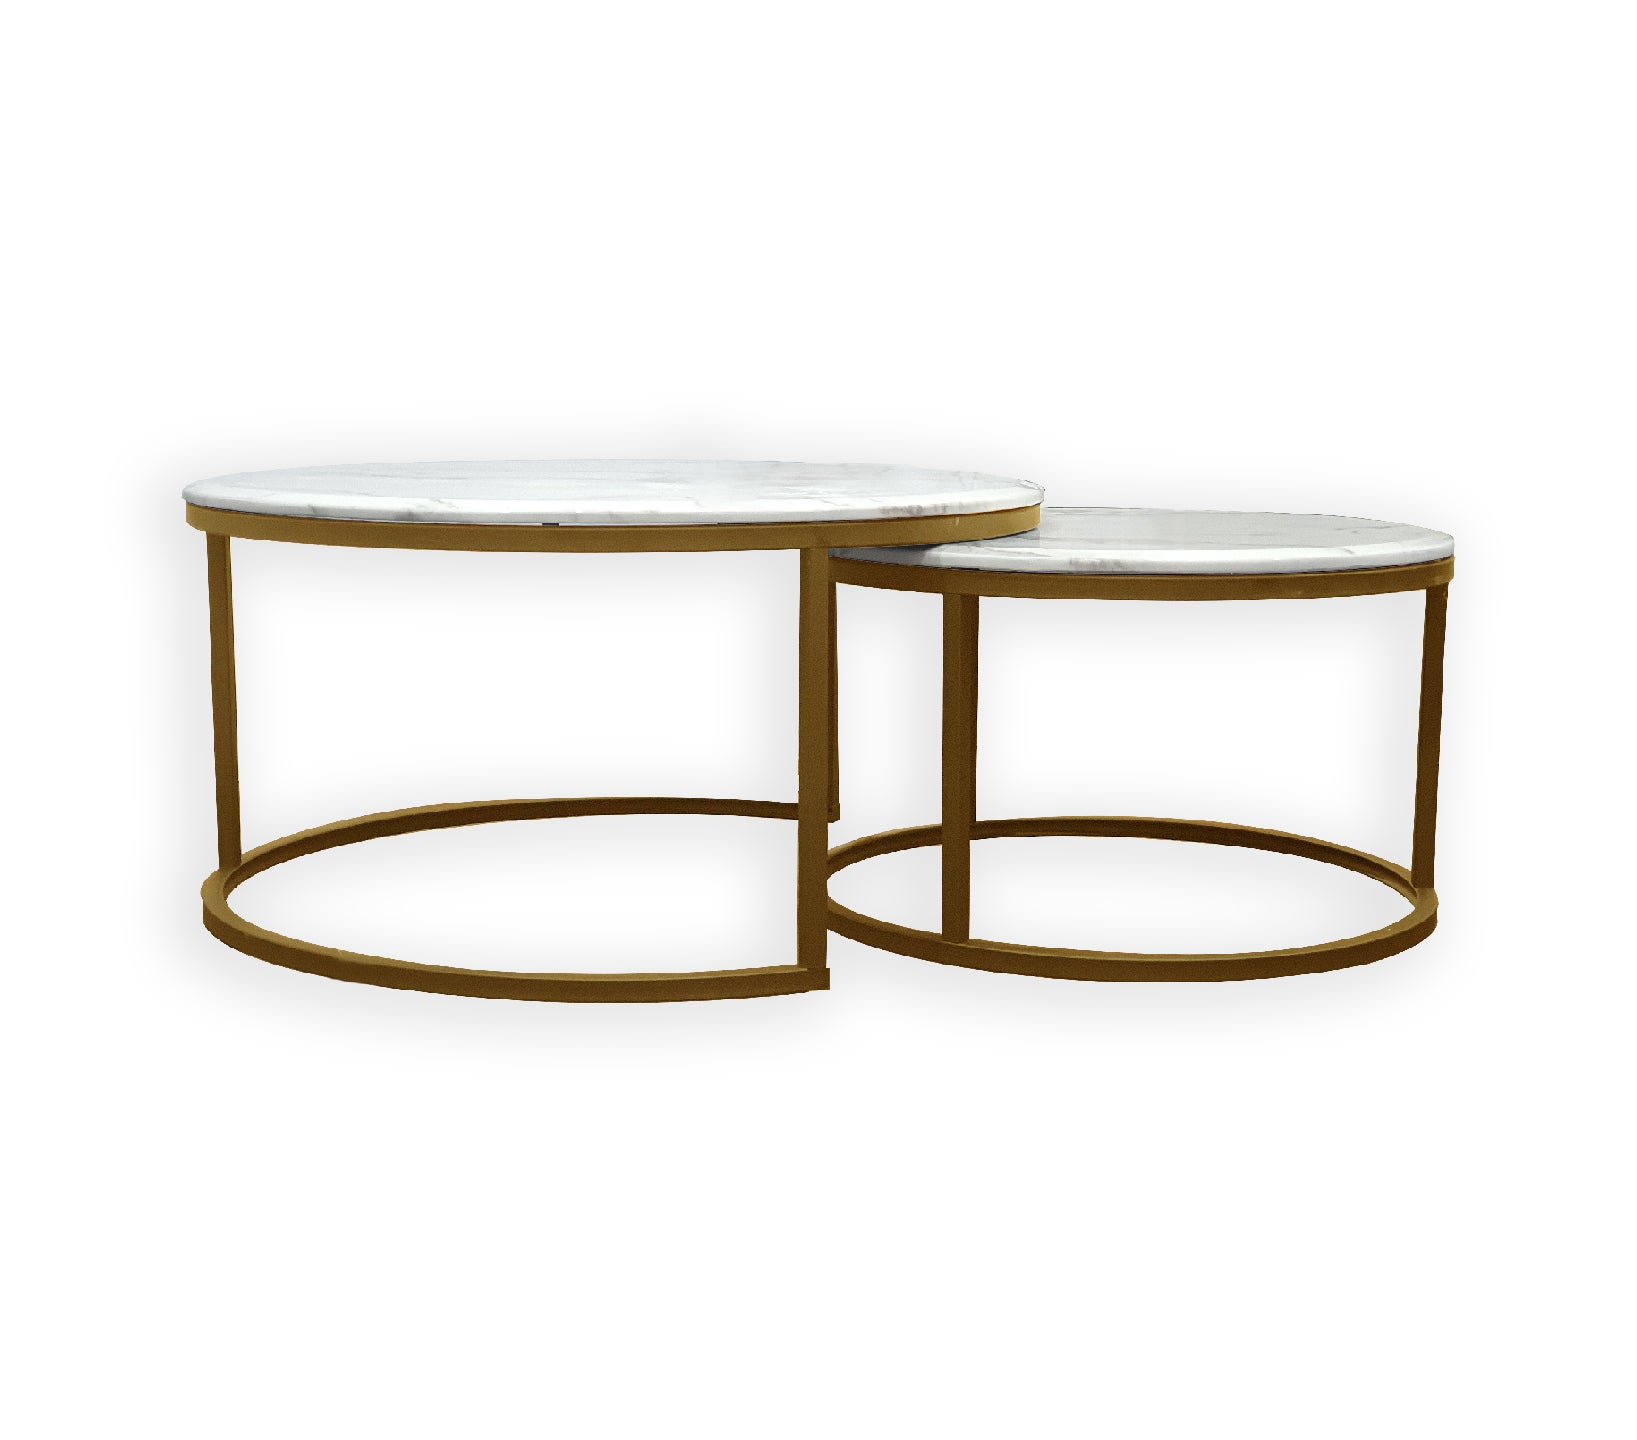 Romana set of 2 Marble Top Nesting Coffee Table - Small 60cm/40cm - Champagne